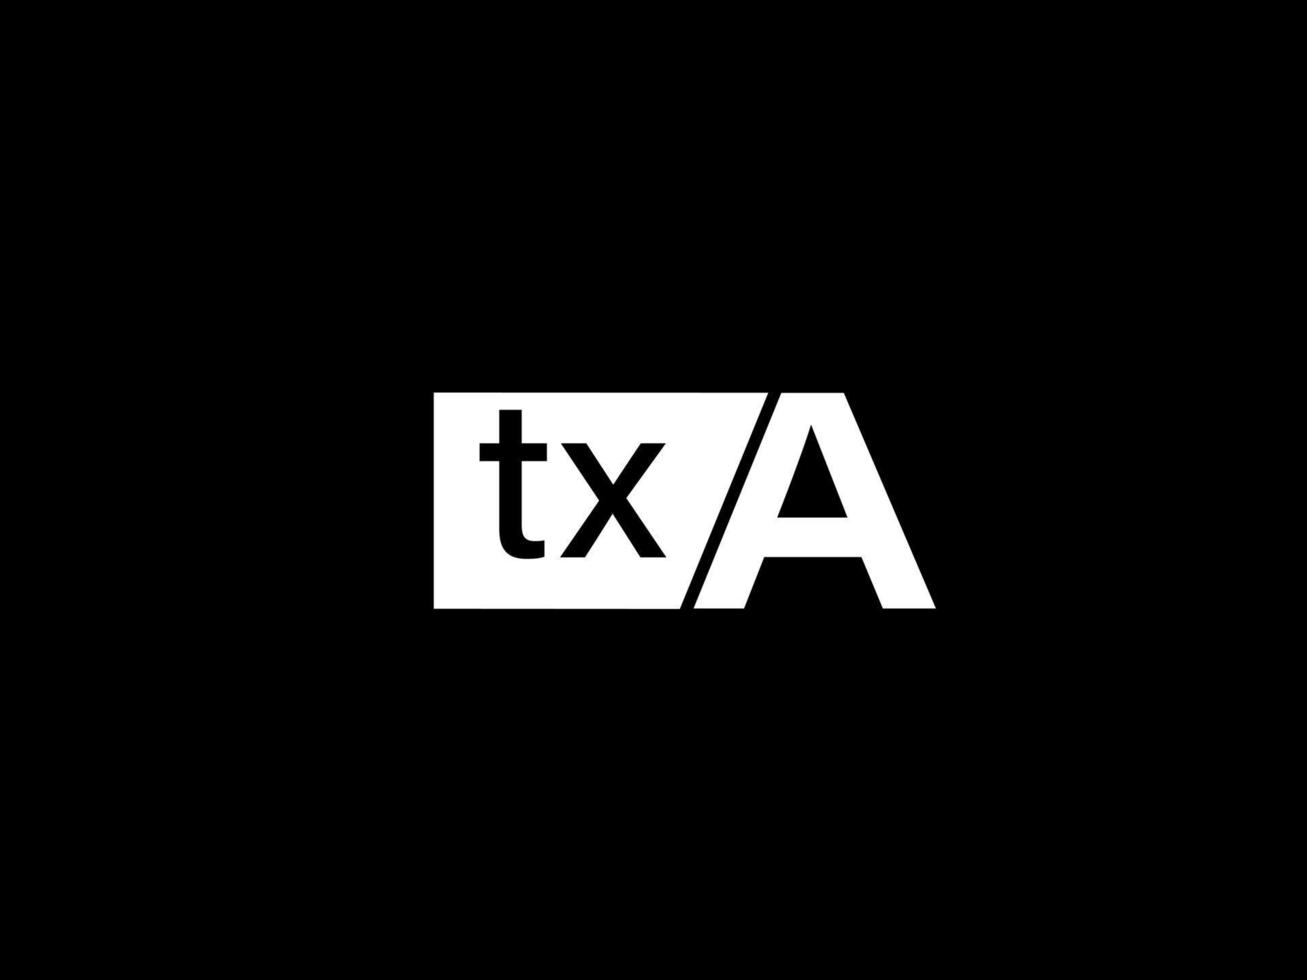 TXA Logo and Graphics design vector art, Icons isolated on black background